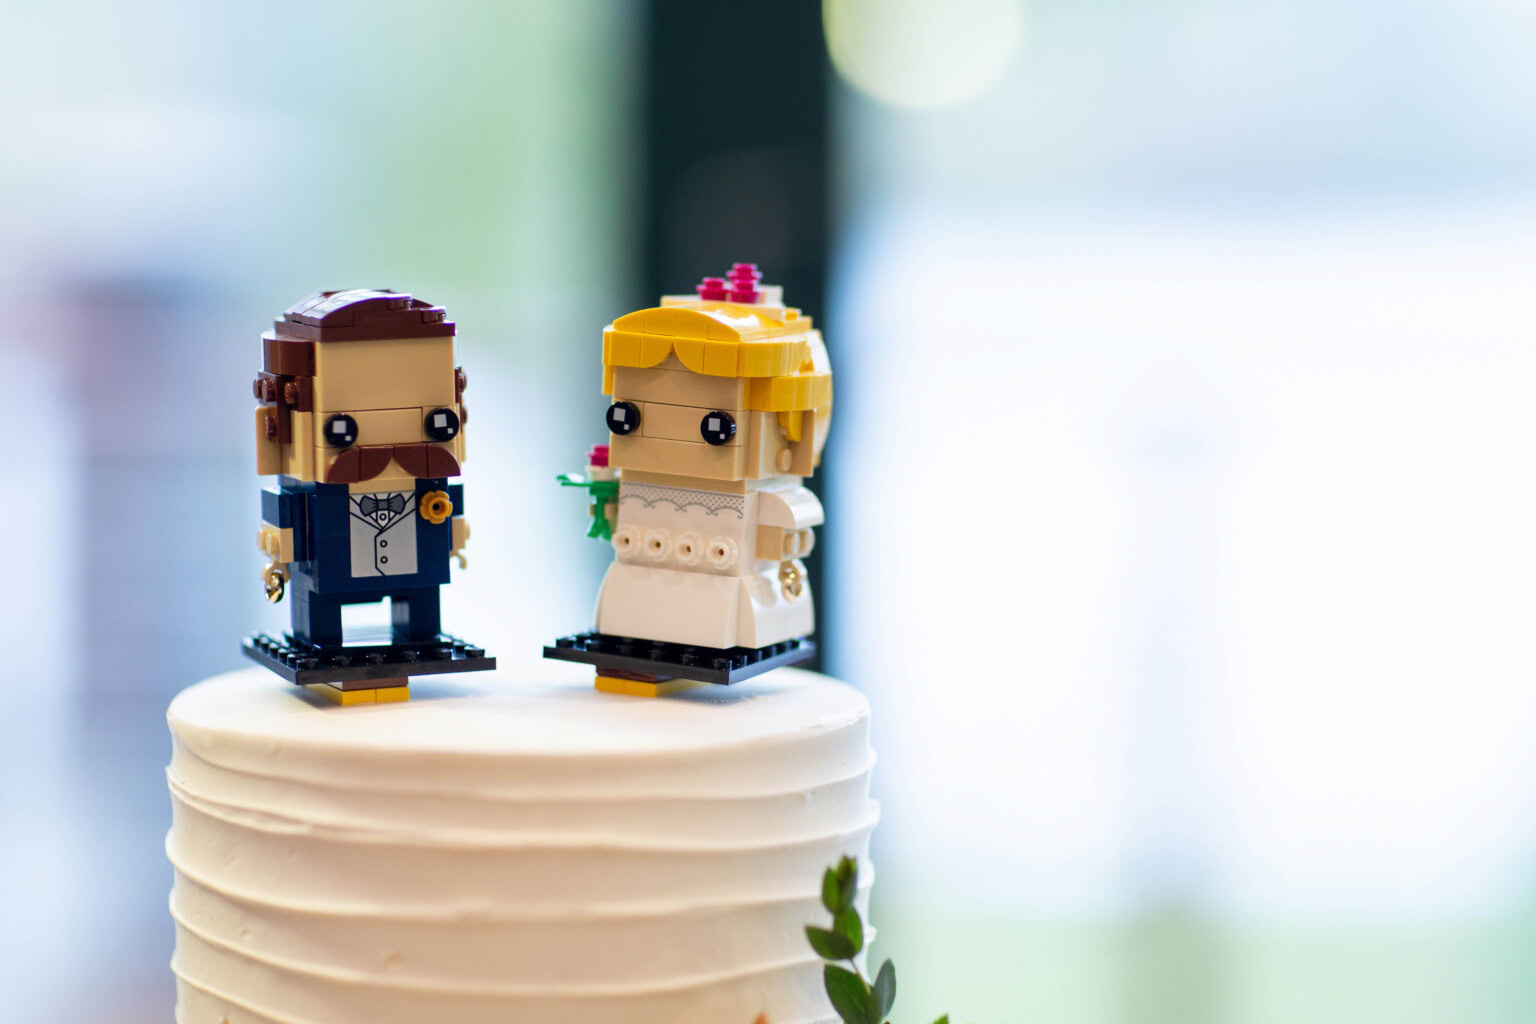 Lego style cake topper figures.